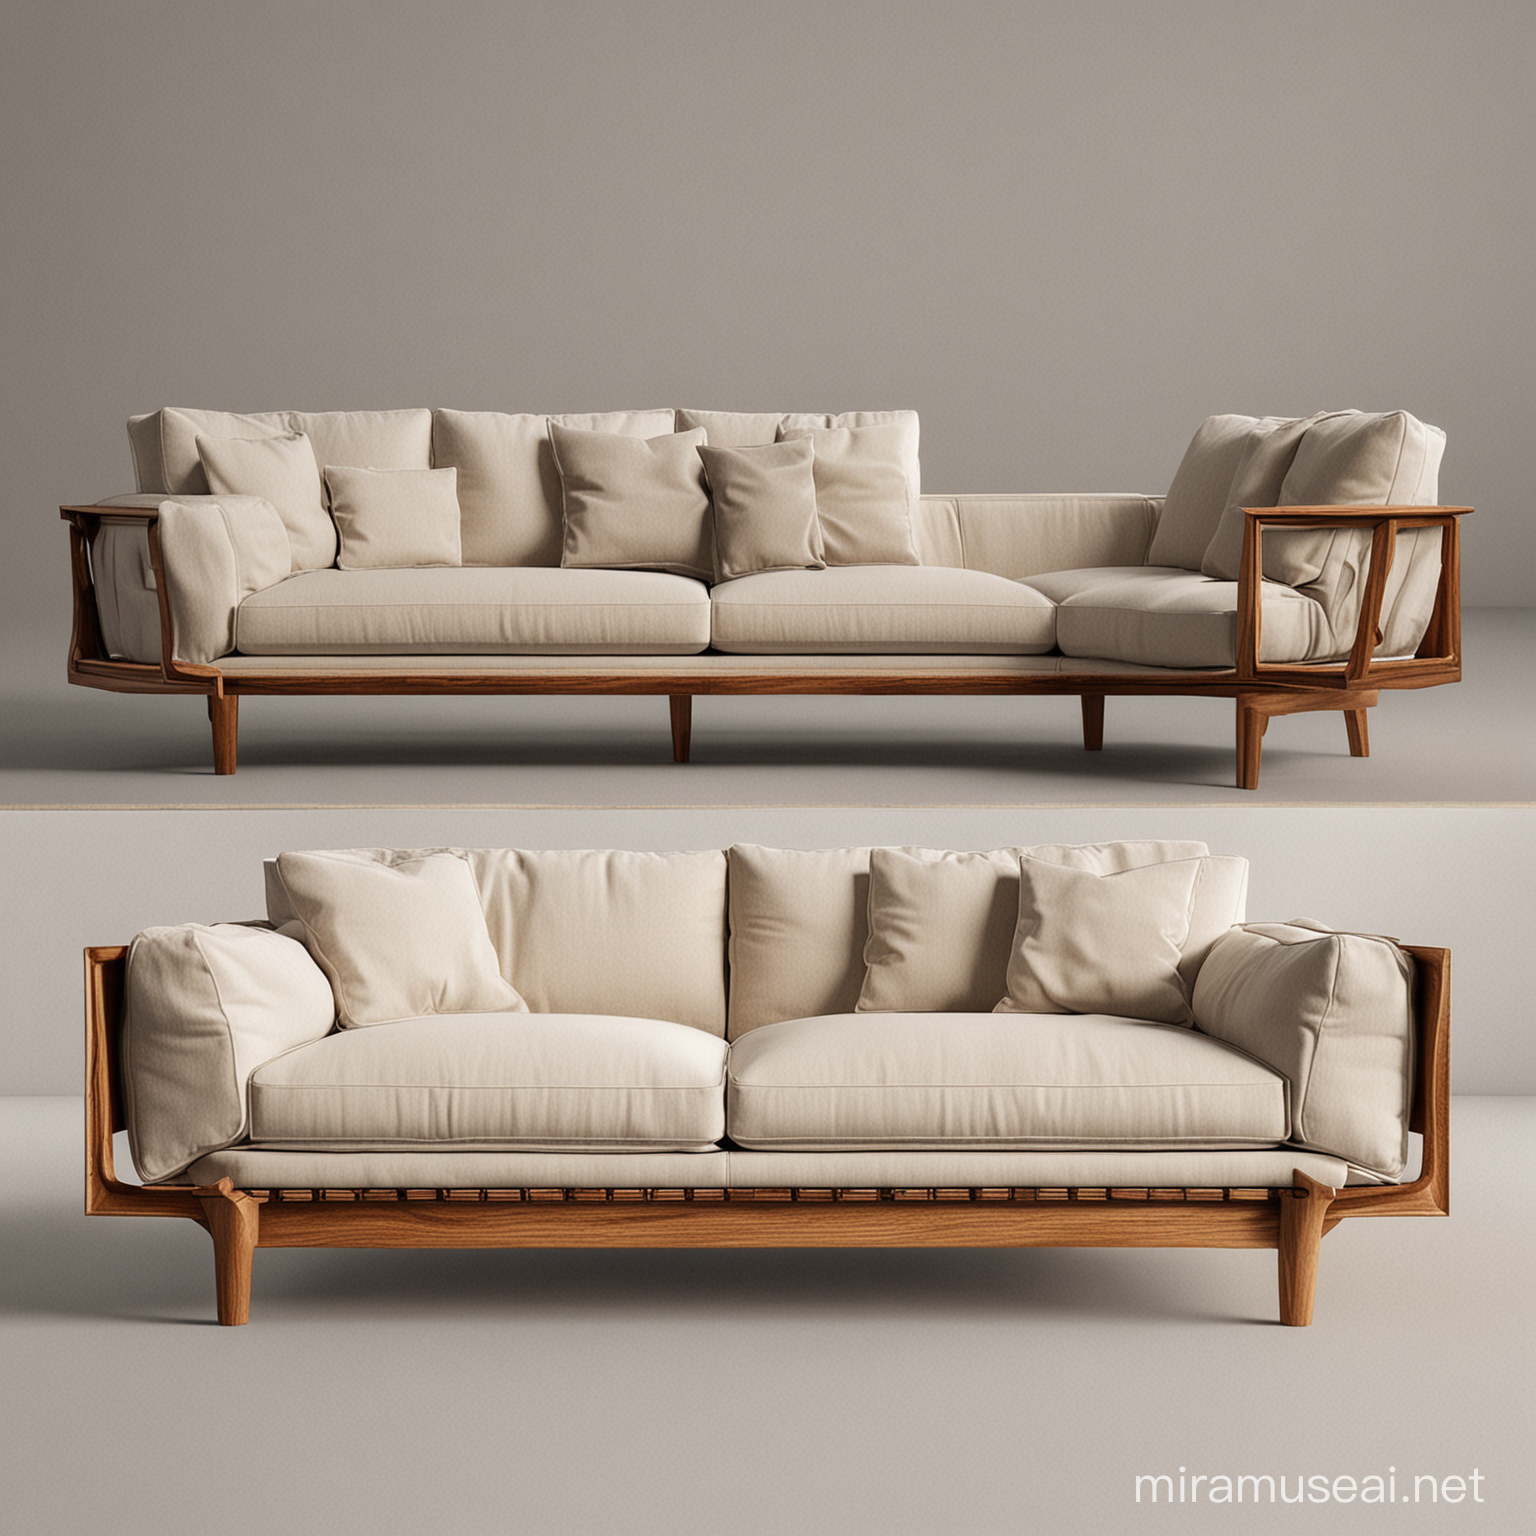 Modern Wooden Sofa Set Design with Intricate Details